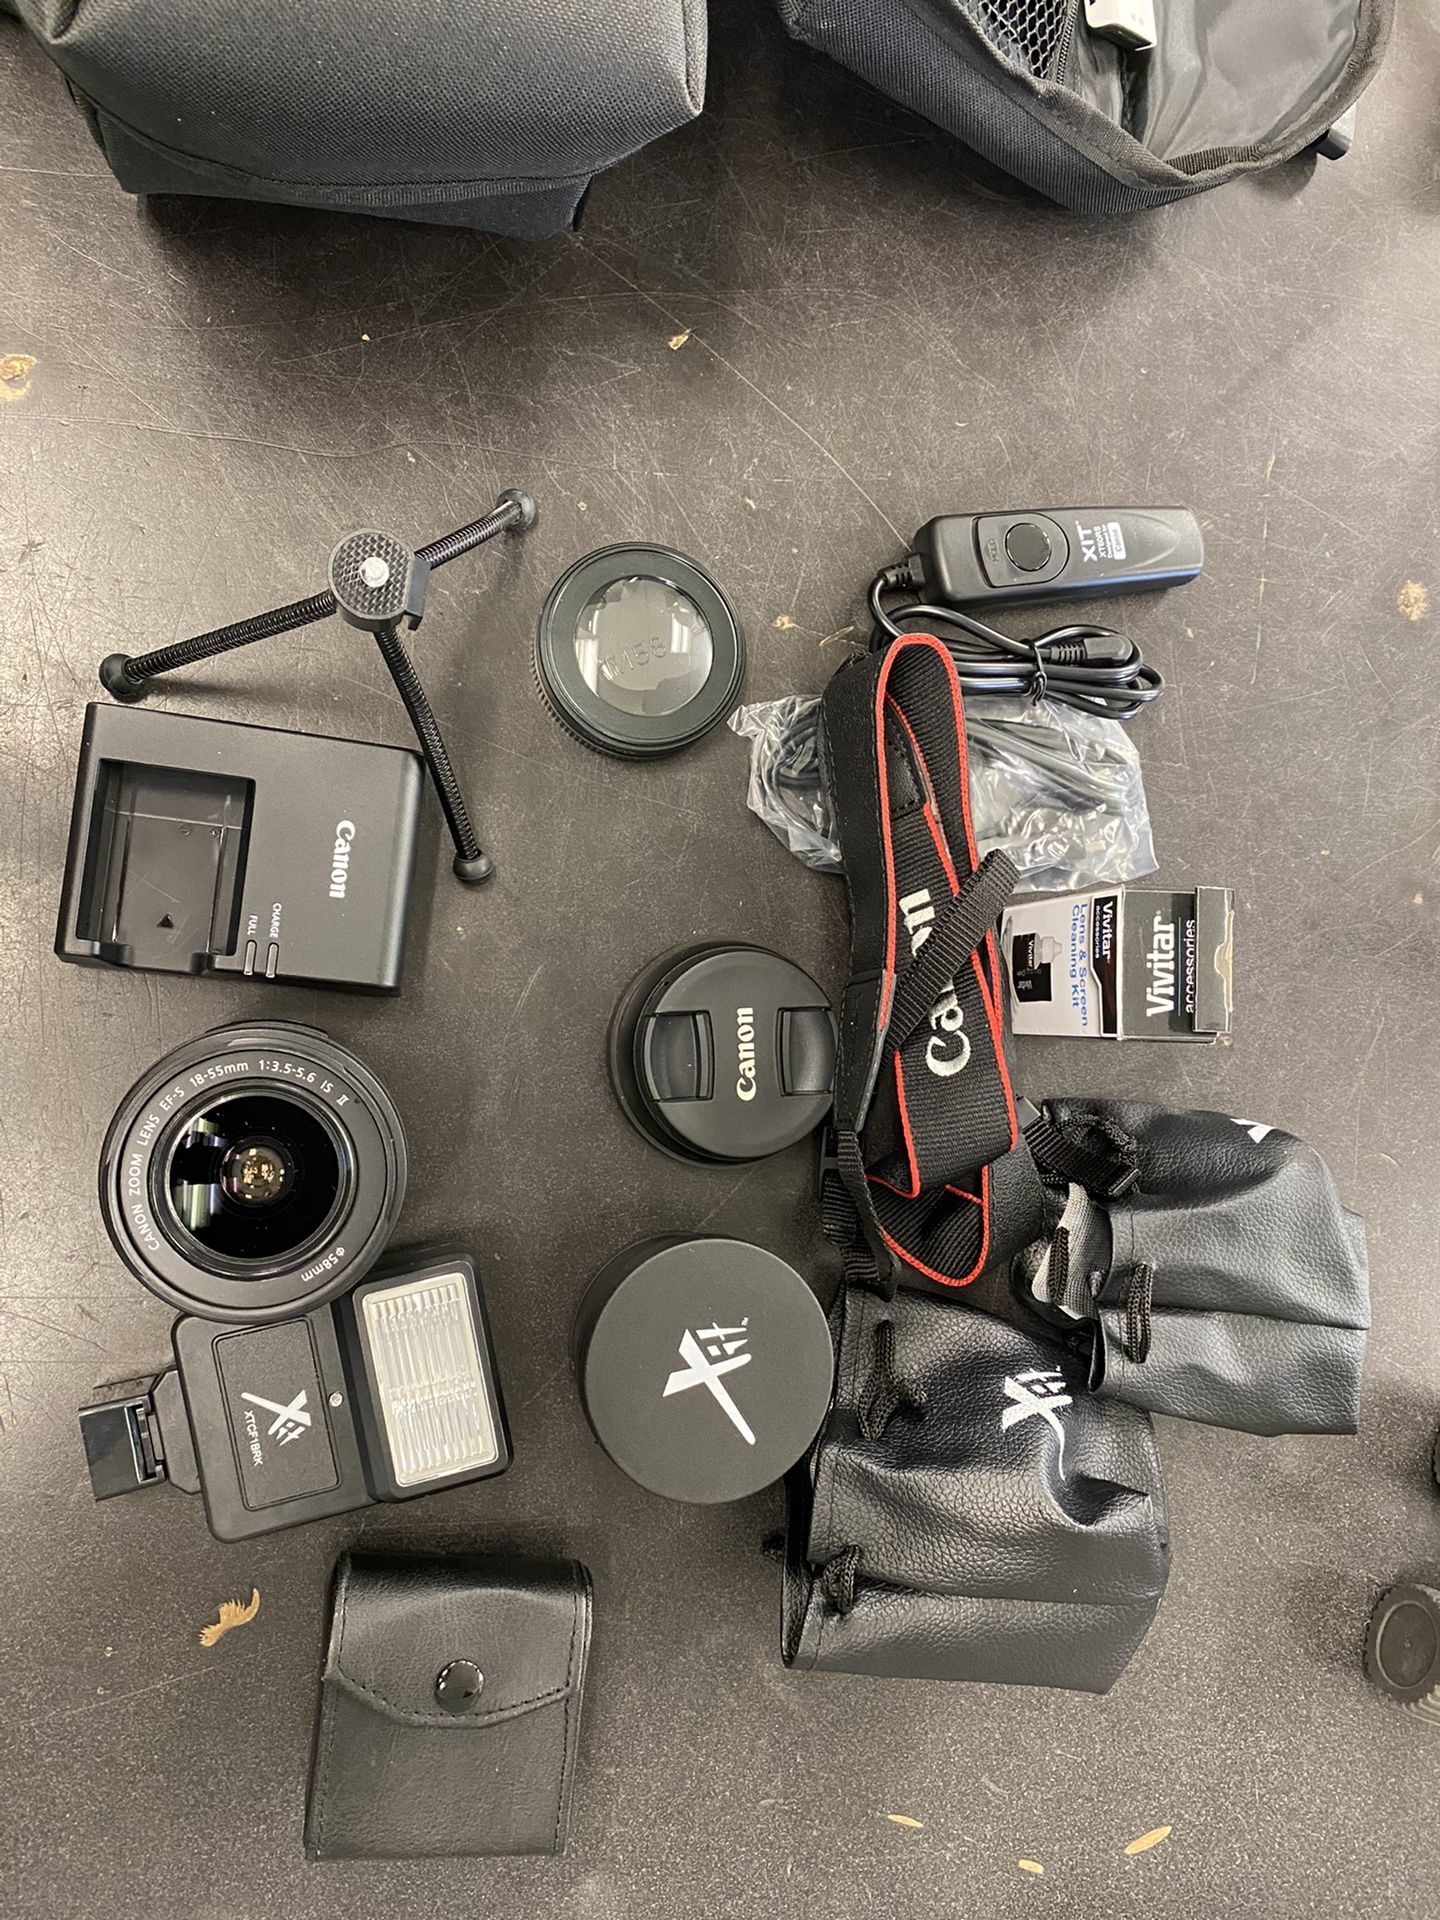 Canon rebel T6 with accessories